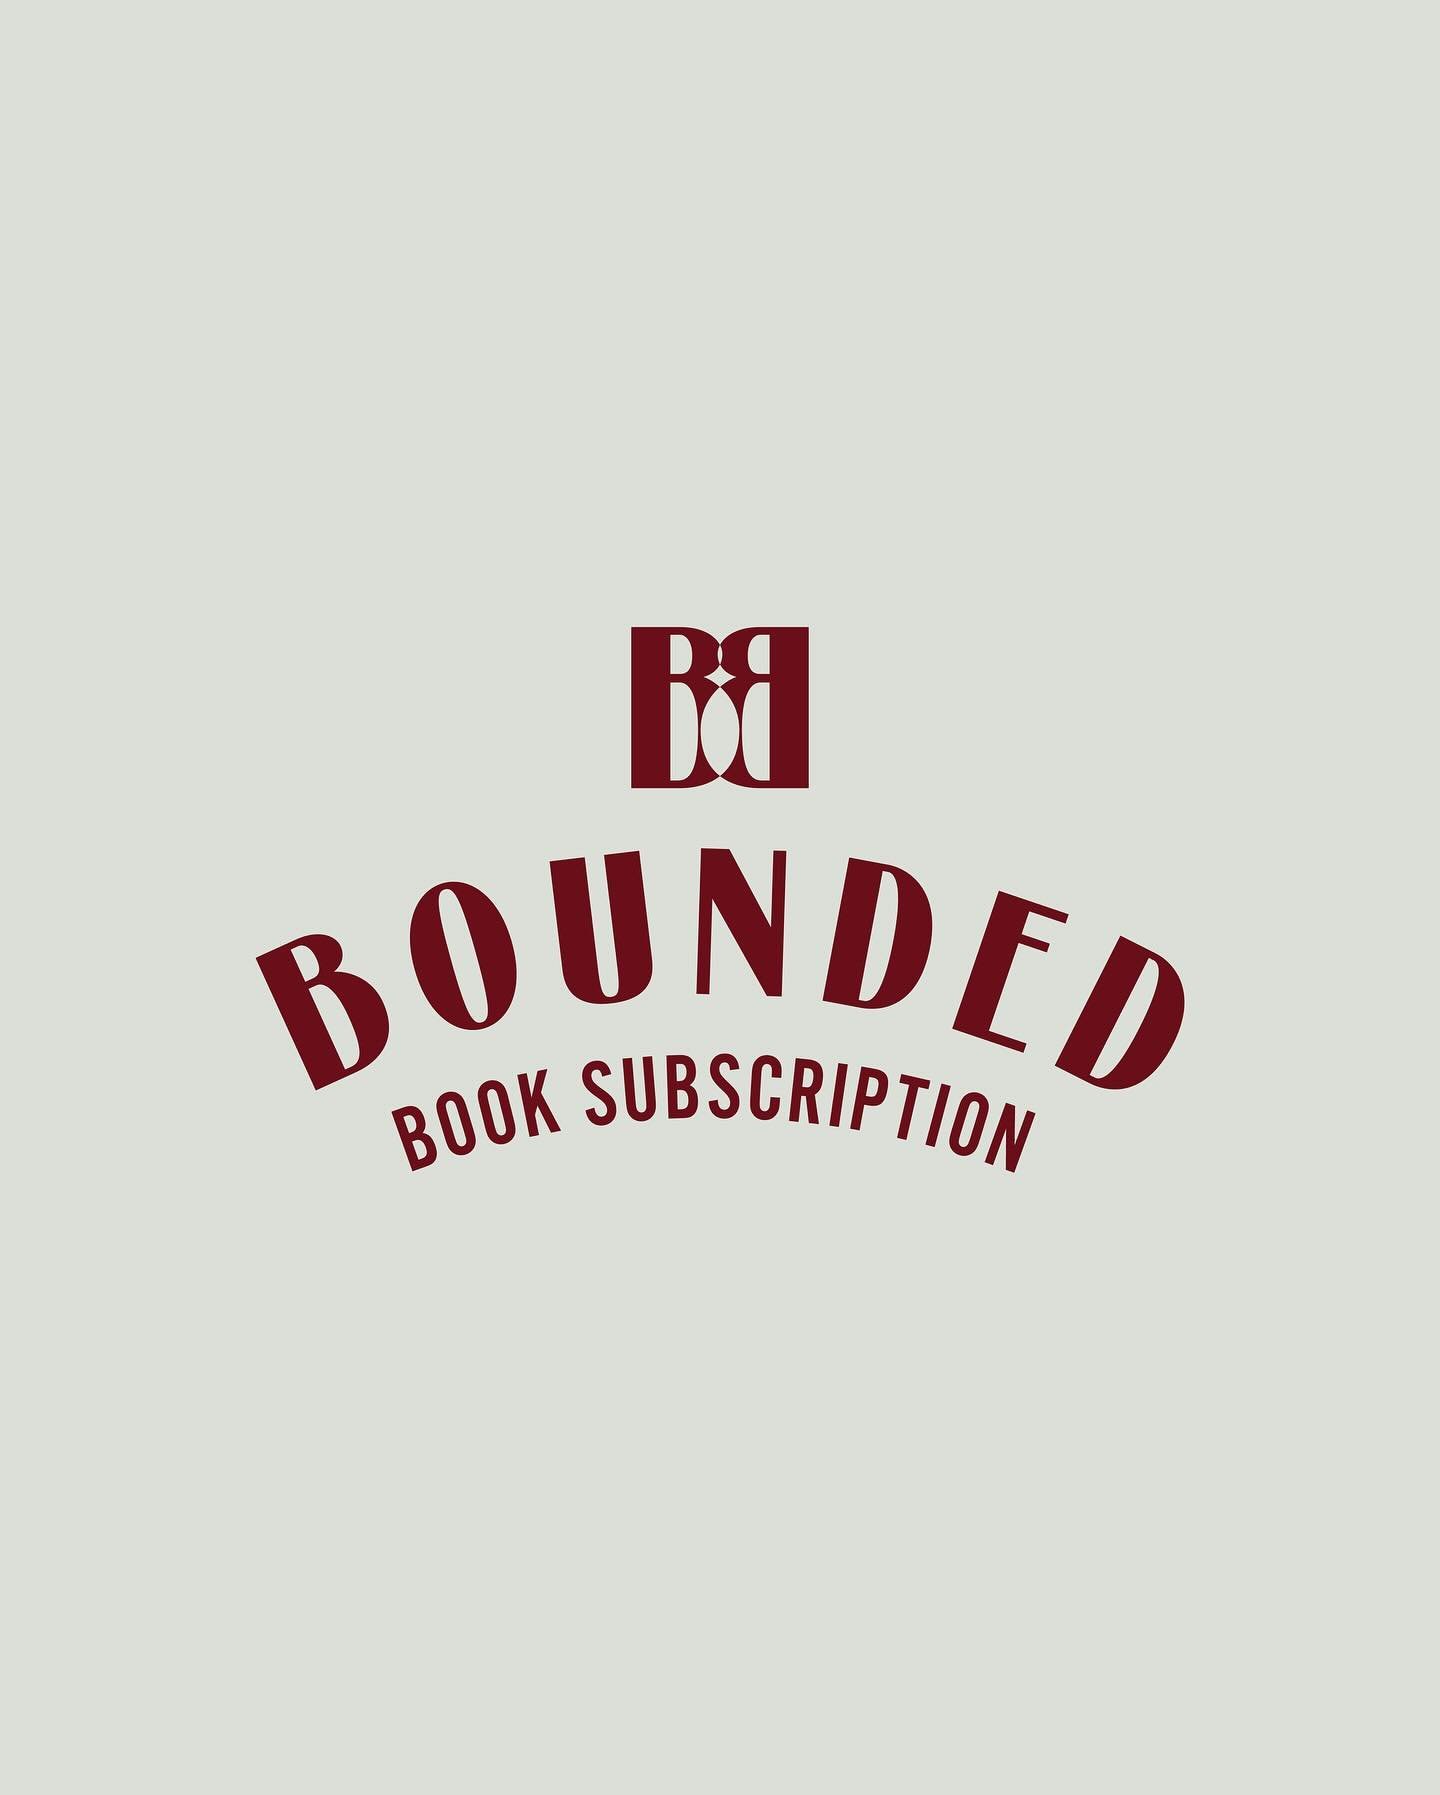 ✦ Brand design for Bounded, a book subscription to keep you up to date with all the booktok reads! 📚✨ 
✦ Bounded is aimed at avid readers who are open-minded and eager to discover hidden literary gems beyond mainstream bestsellers.&nbsp;

✦ The logo